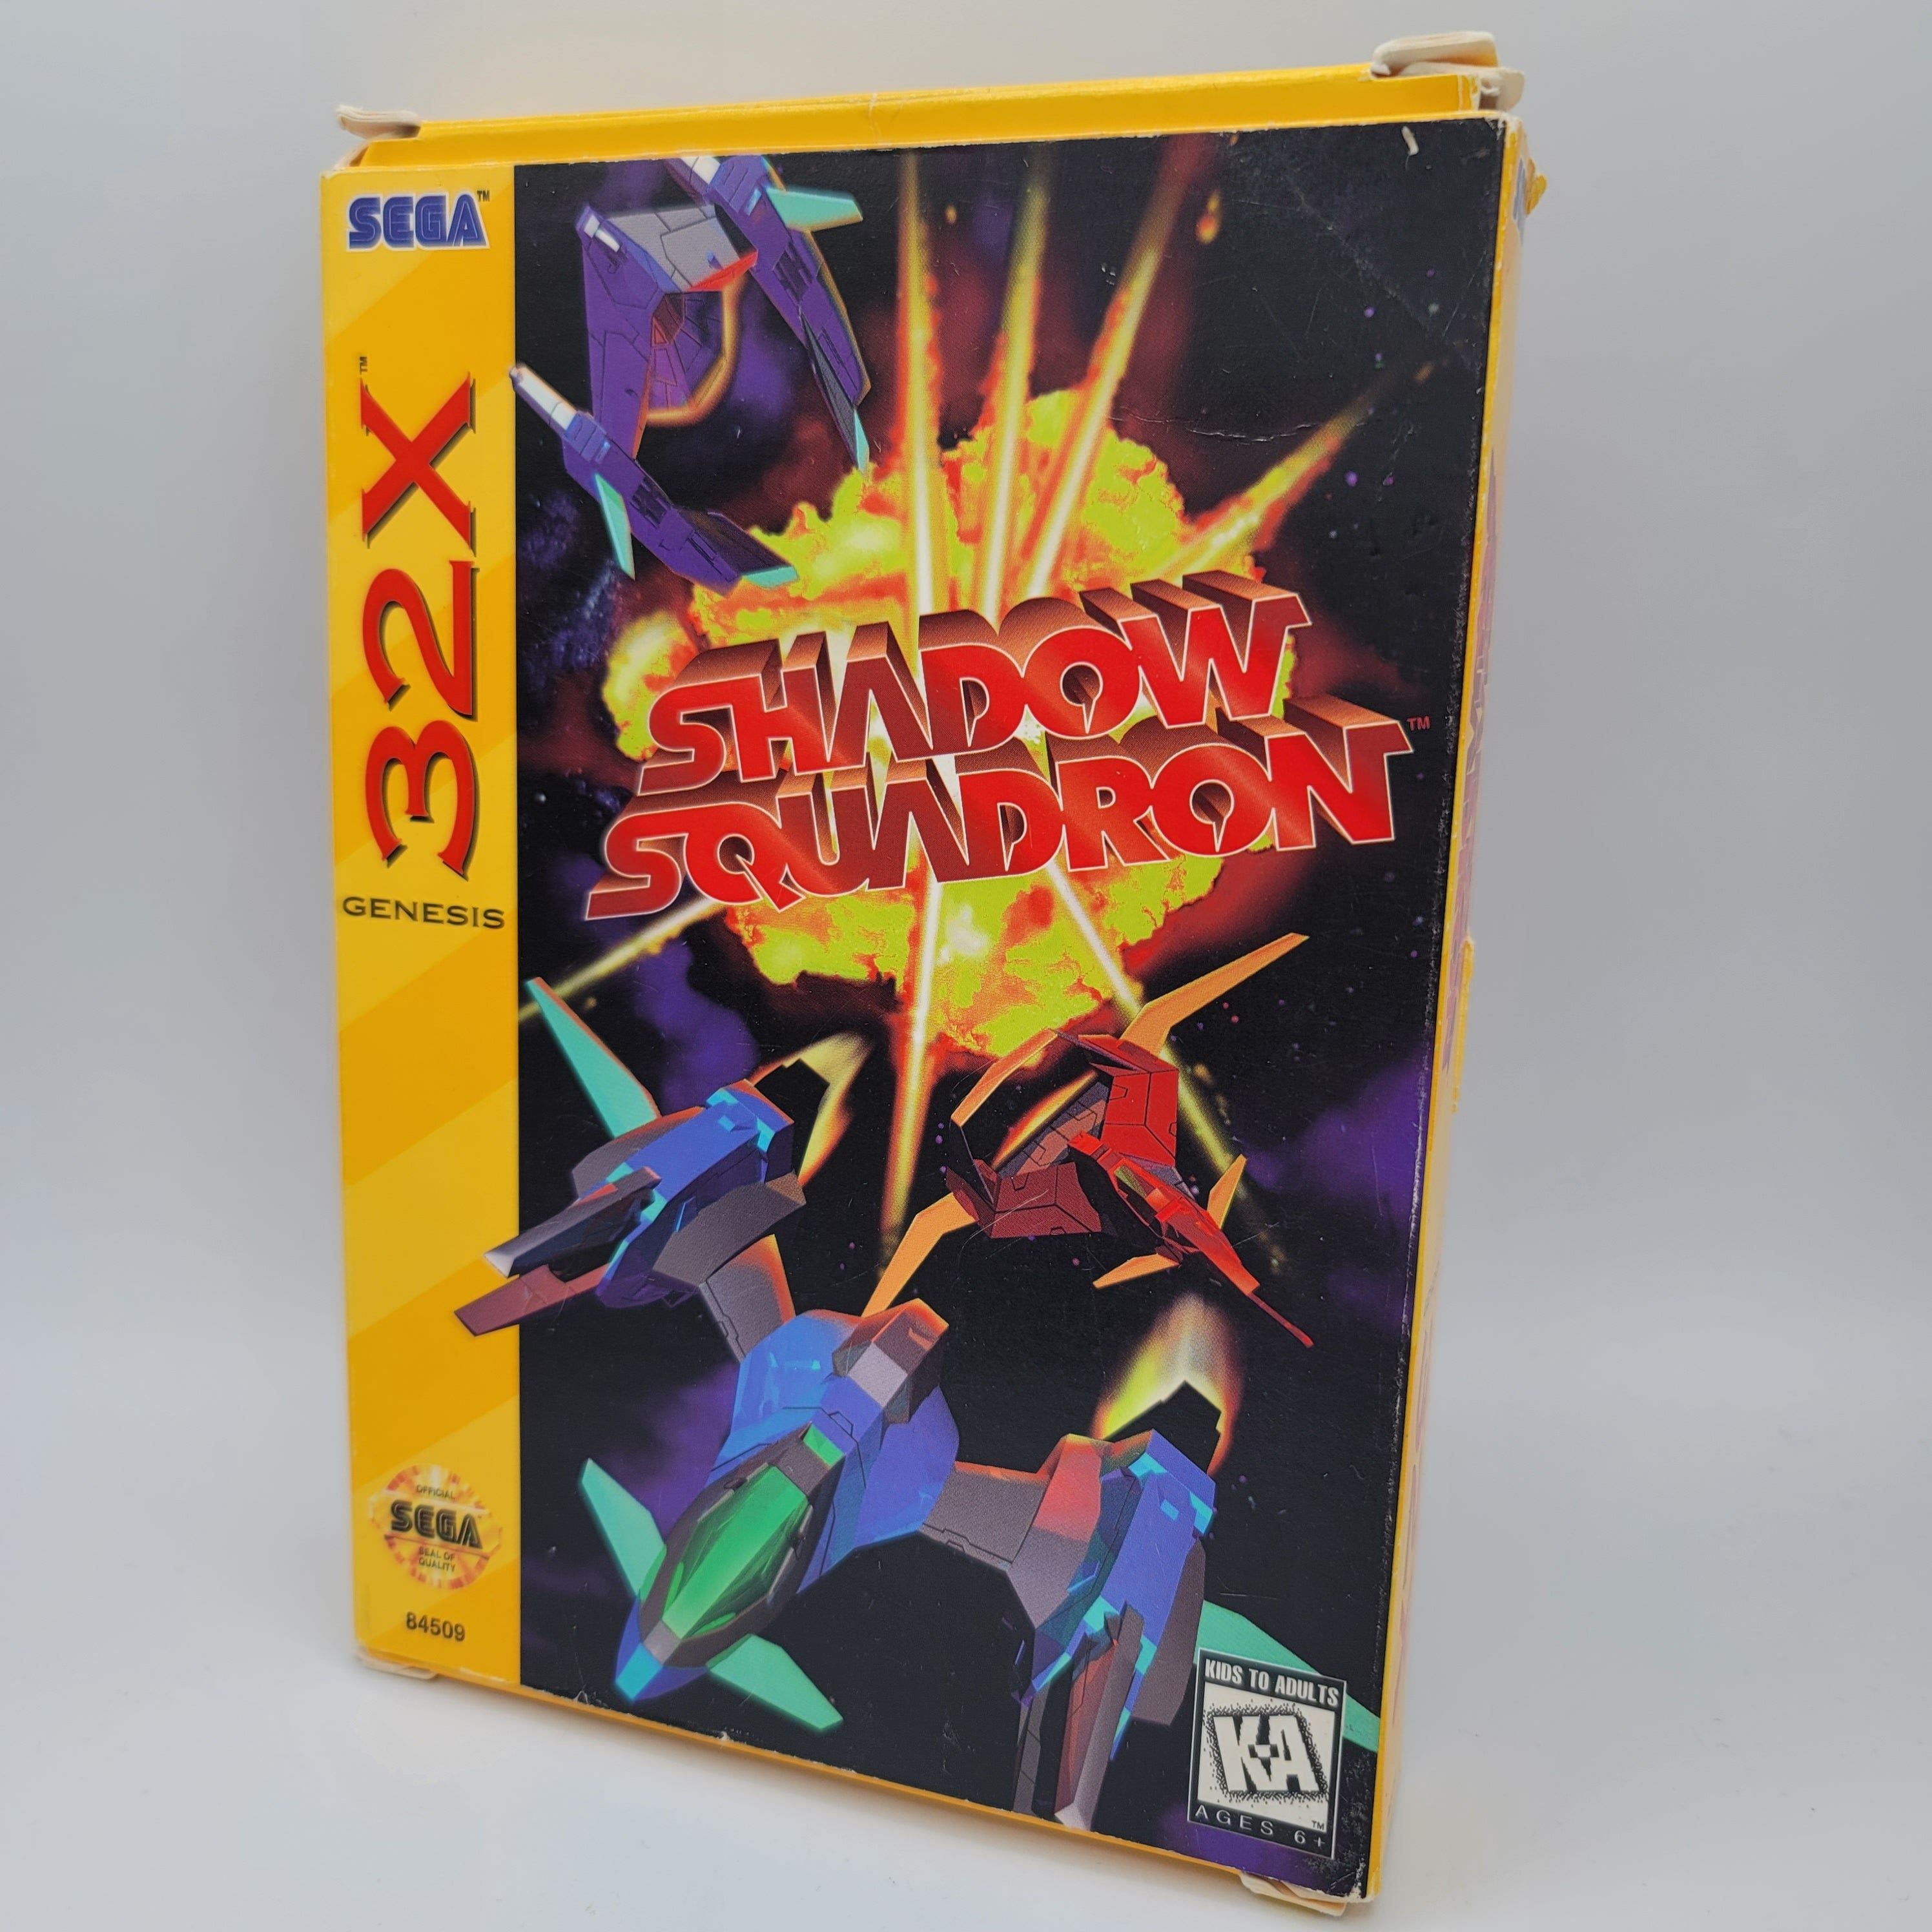 32X - Shadow Squadron (Complete in Box / No Manual)